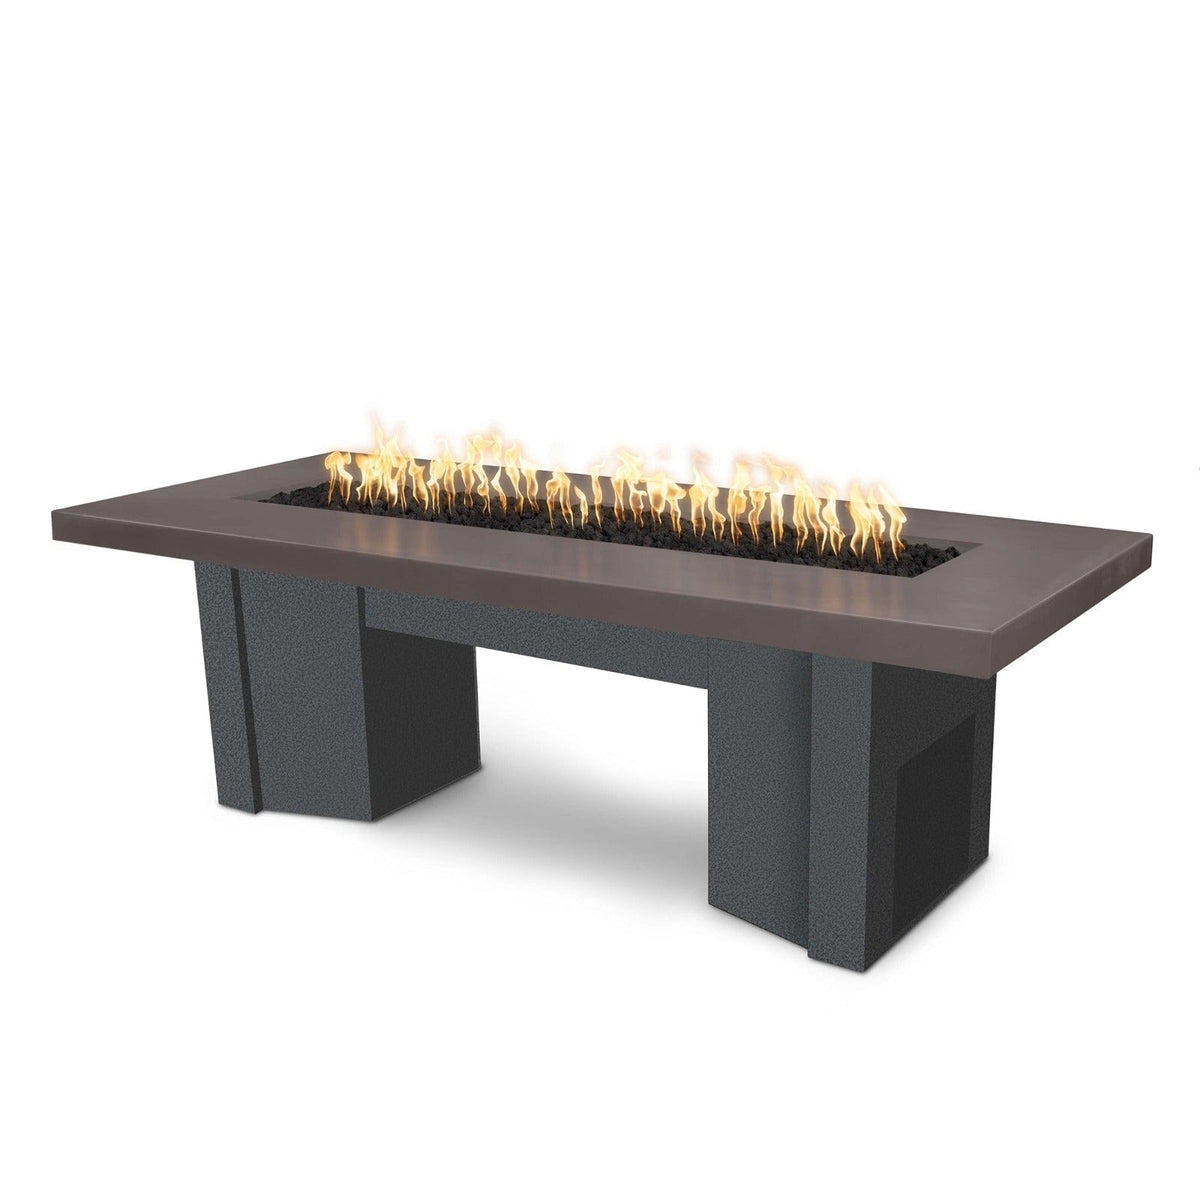 The Outdoor Plus Fire Features Chestnut (-CST) / Silver Vein Powder Coated Steel (-SLV) The Outdoor Plus 78&quot; Alameda Fire Table Smooth Concrete in Liquid Propane - Flame Sense System with Push Button Spark Igniter / OPT-ALMGFRC78FSEN-LP